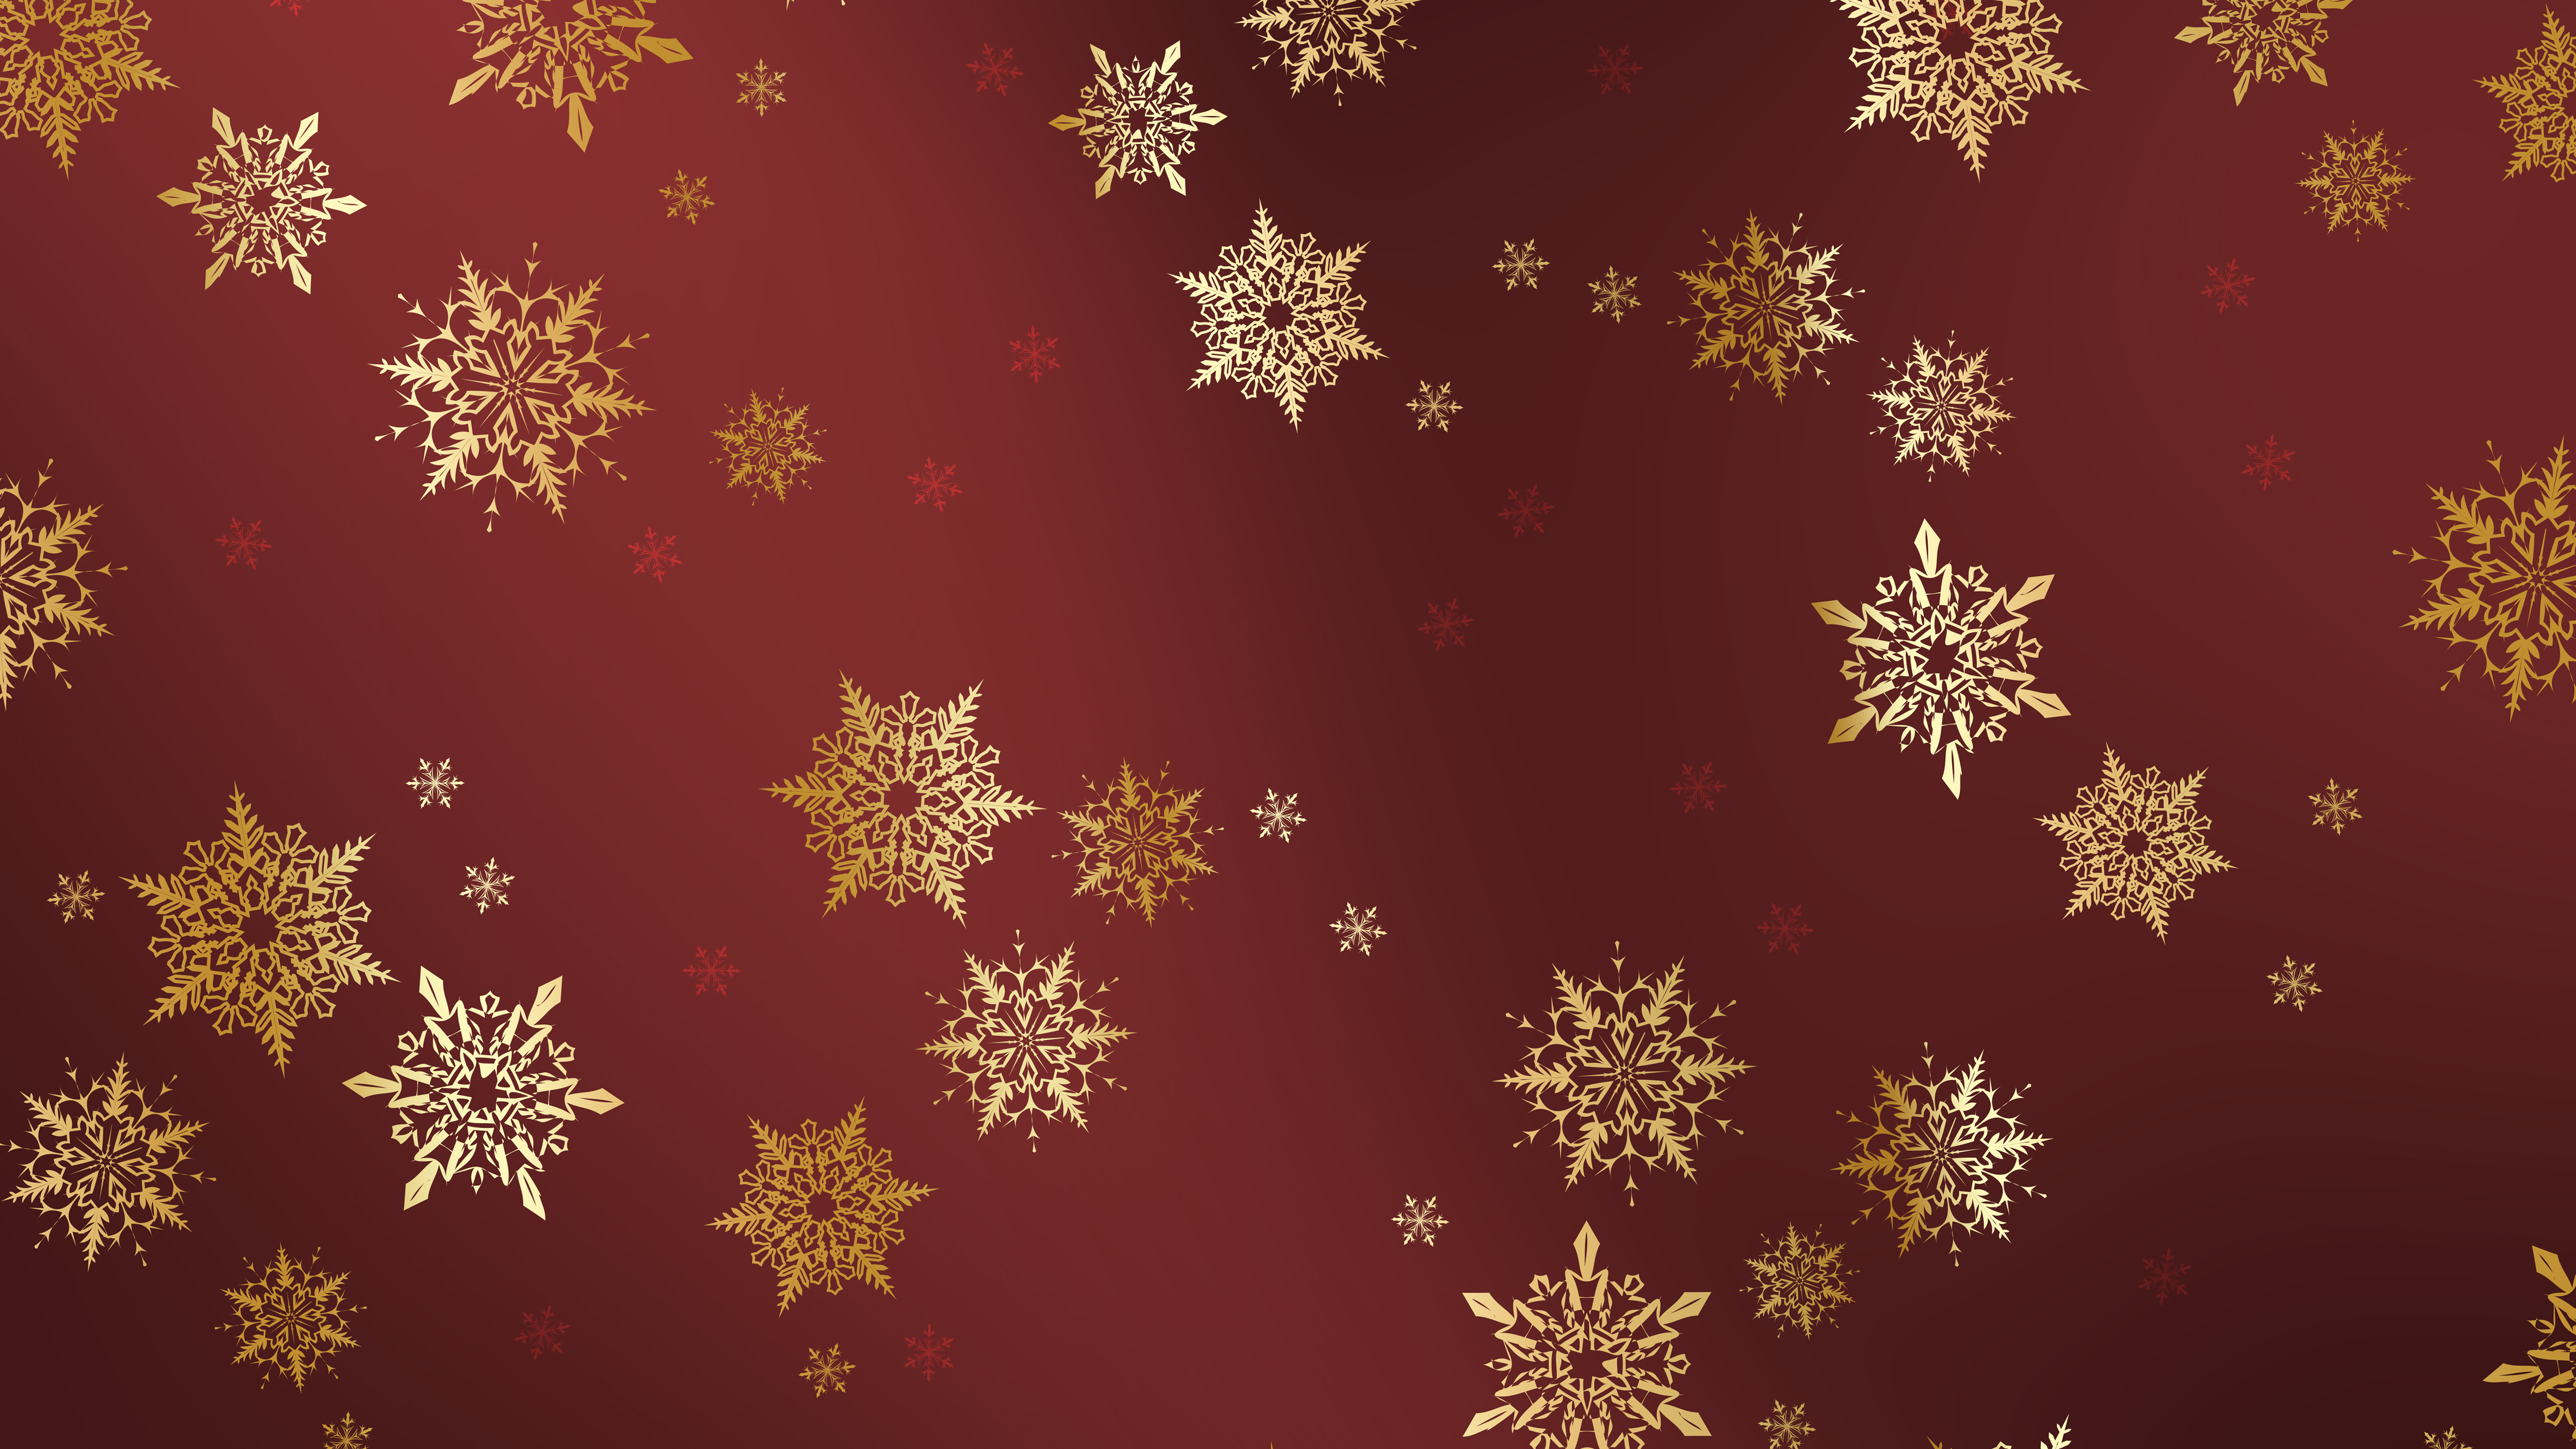 General 5120x2880 3D Abstract abstract snowflakes Christmas